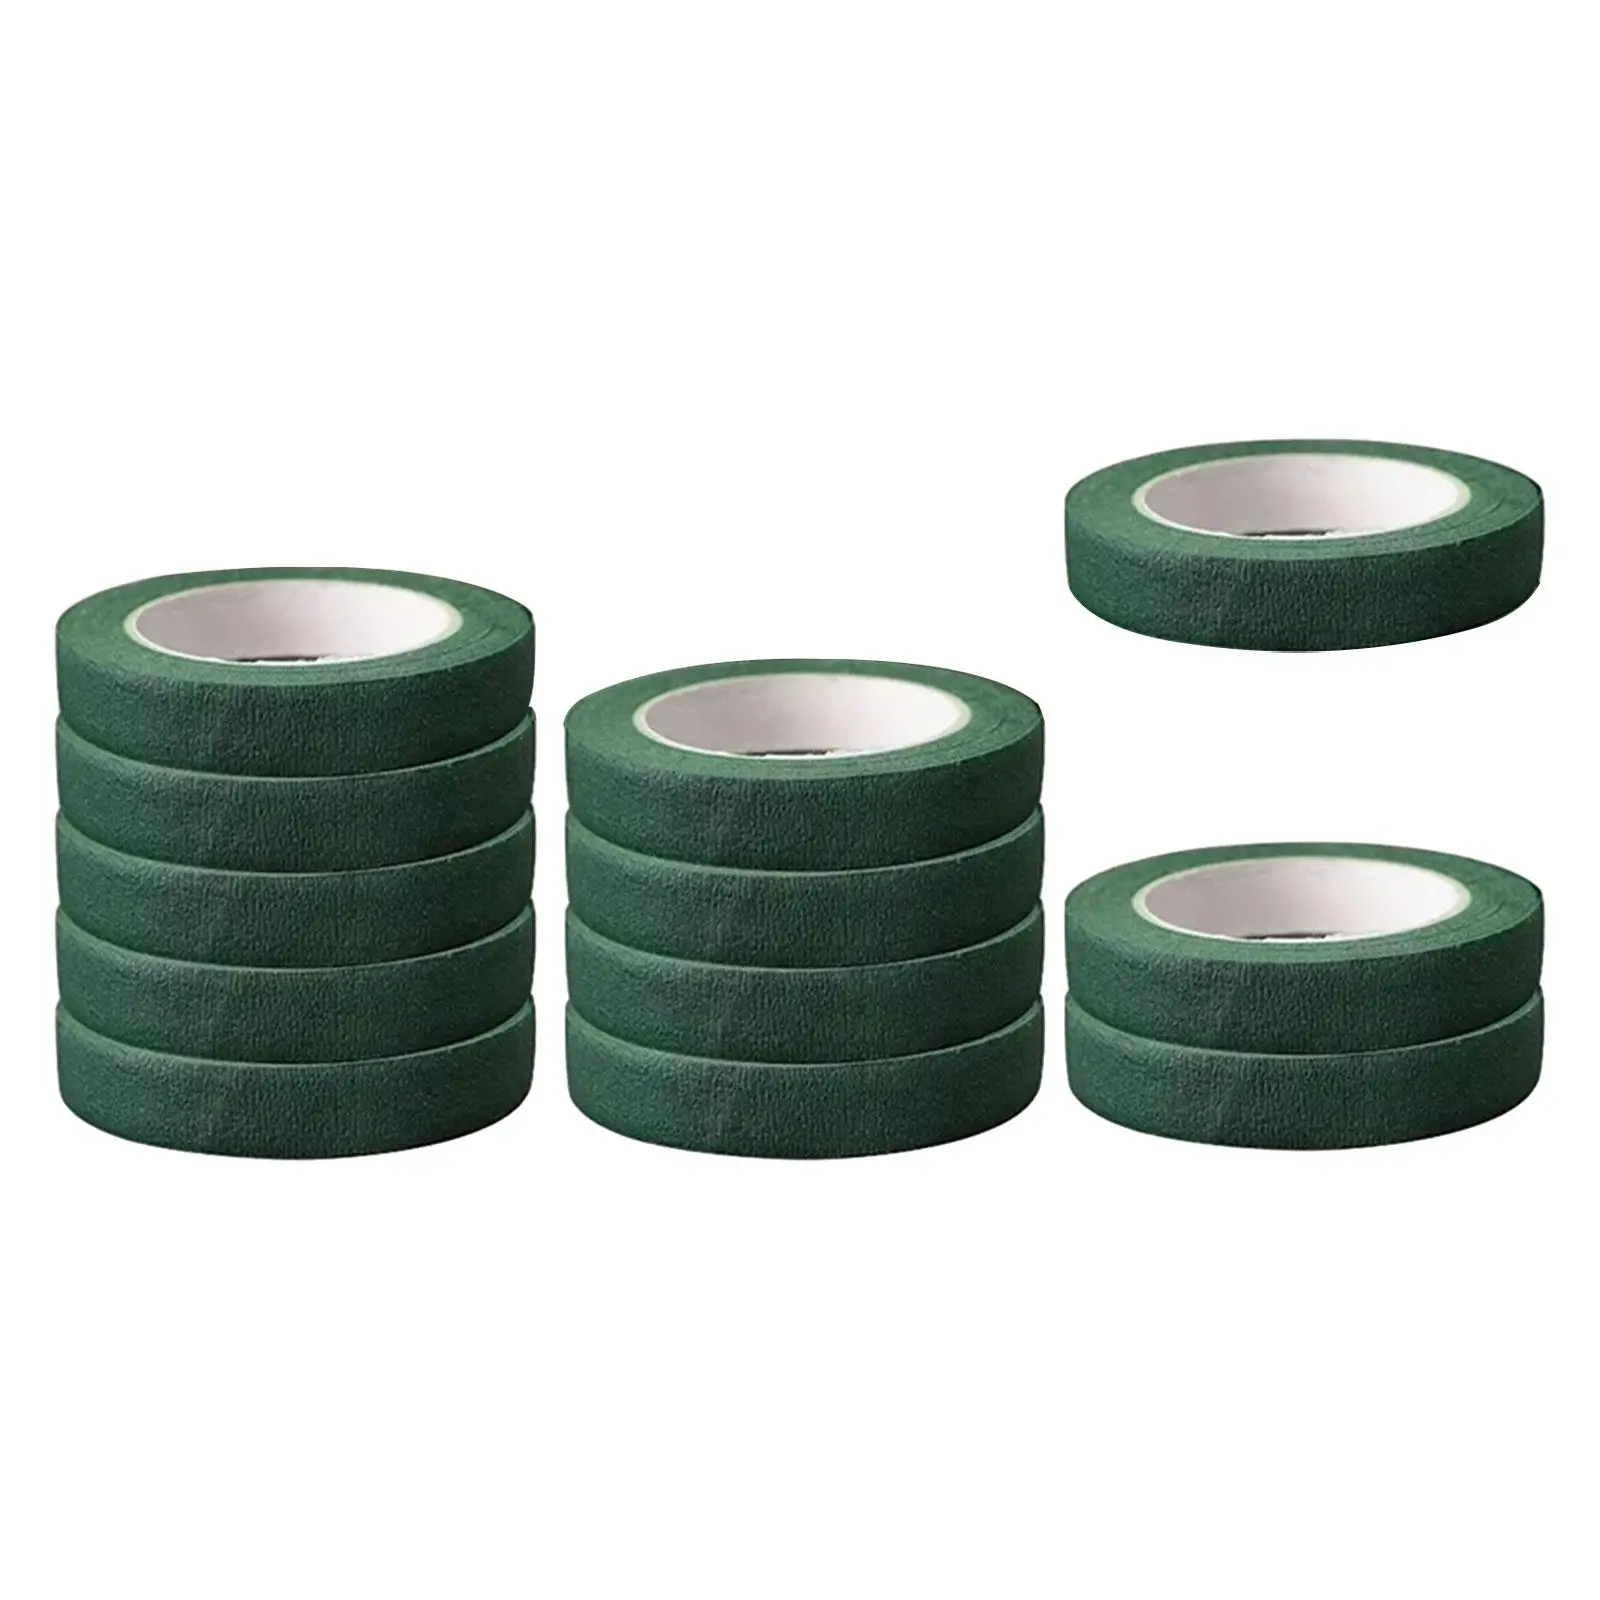 12 Rolls Floral Tapes DIY Length 30M Dark Green Flower Tapes for Home Decoration Bouquet Stem Wrapping Wedding Bridal Bouquets